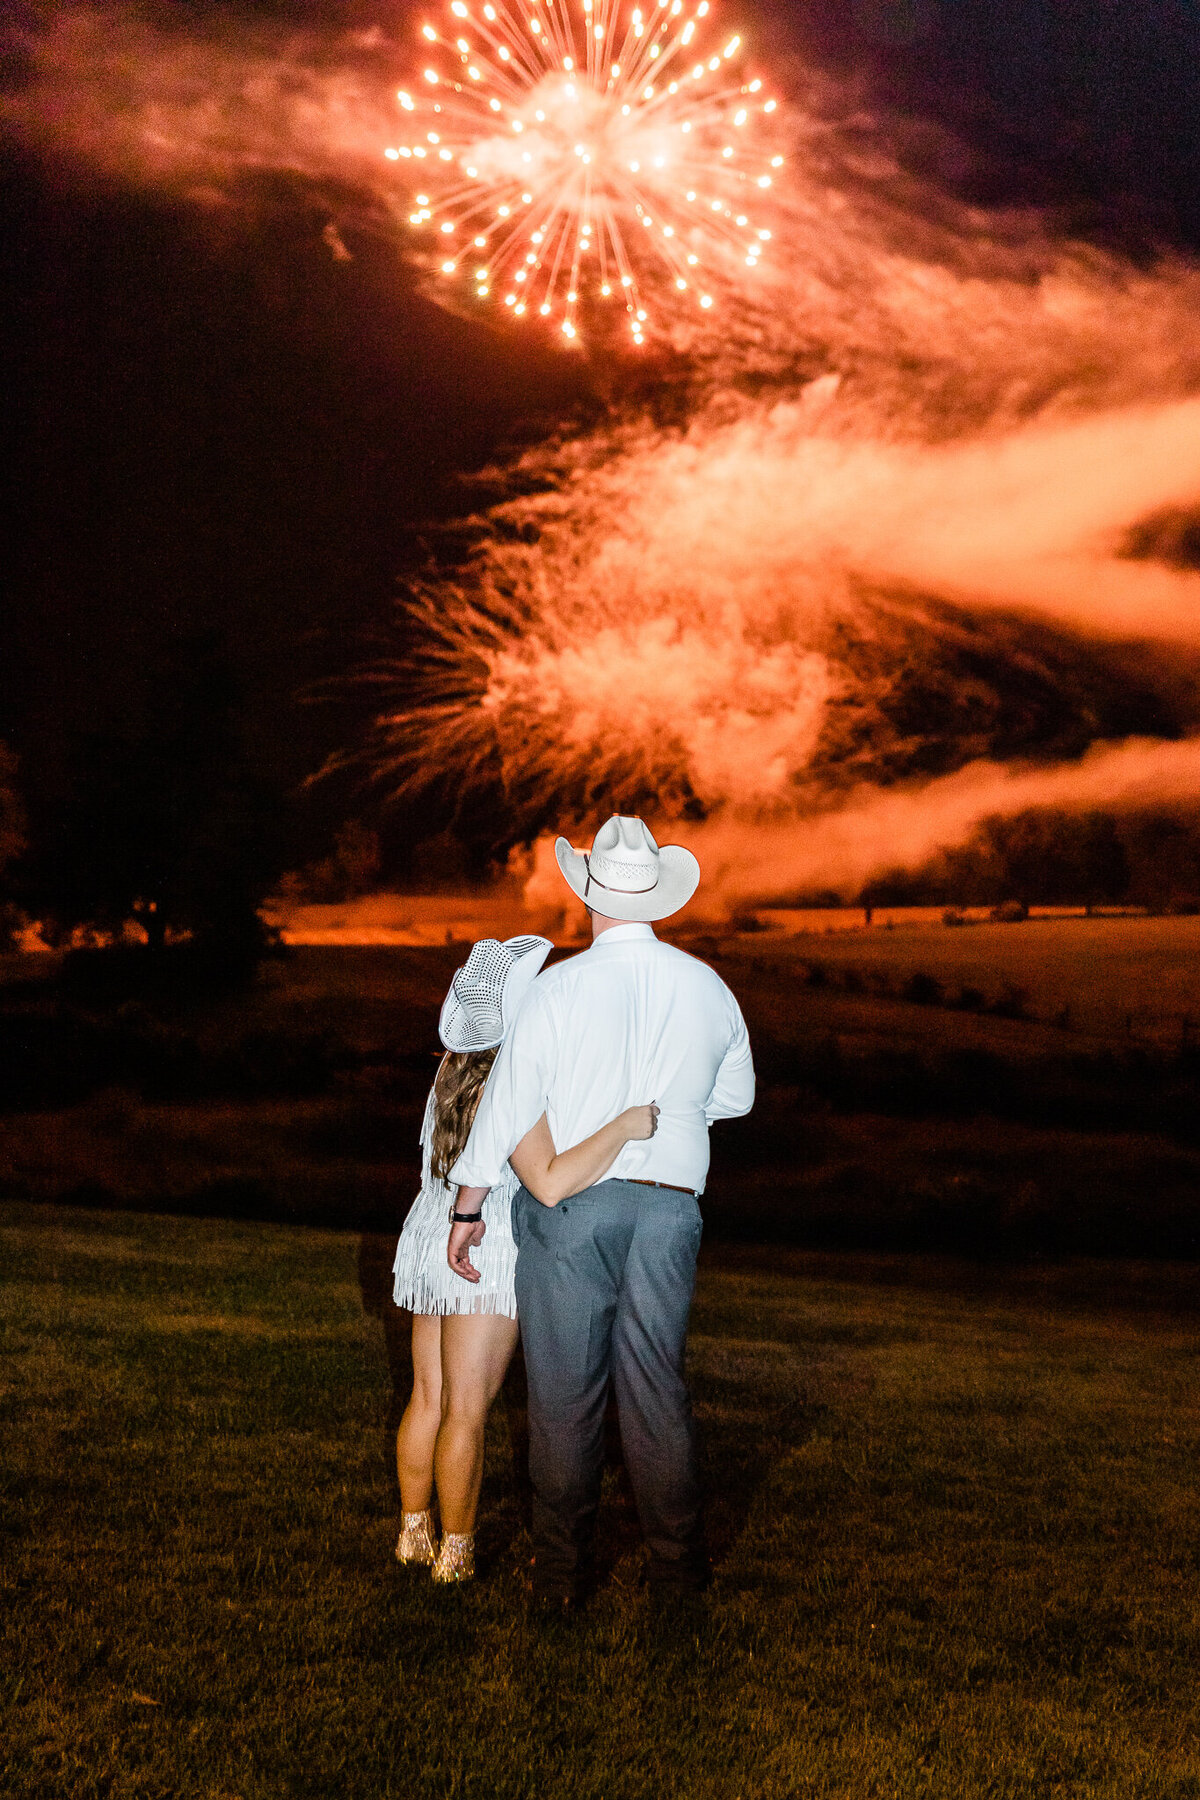 firewordk show at the end of a wedding ceremony with bride and groom standing together and embracing as they watch the bright lights explode in the air with bride and groom wearing cowboy hats captured by Virginia wedding photographer